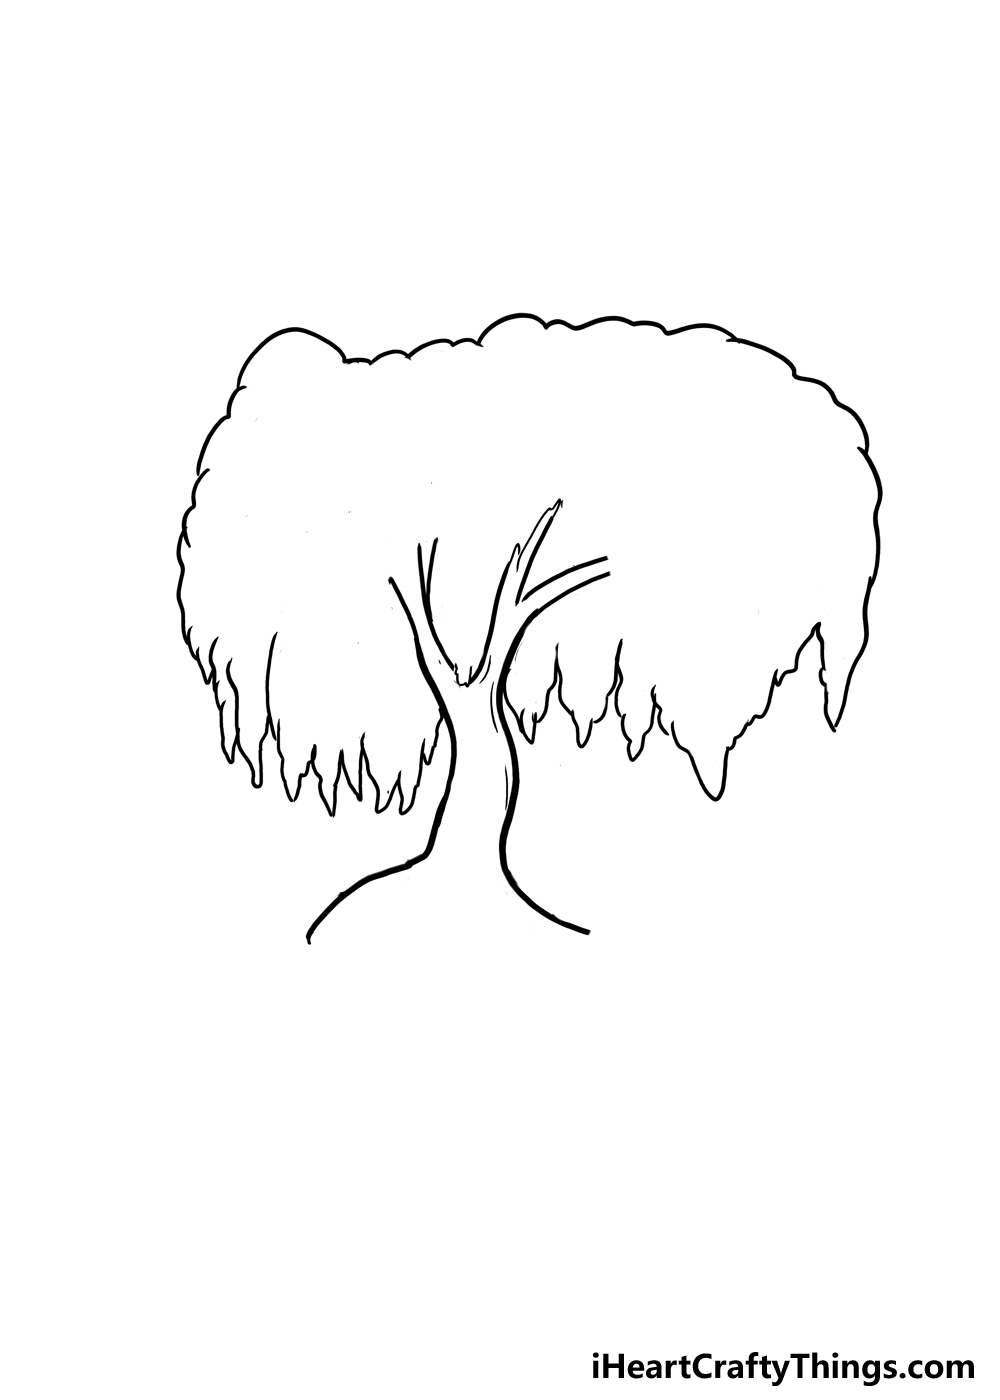 How to Draw A Willow Tree step 3